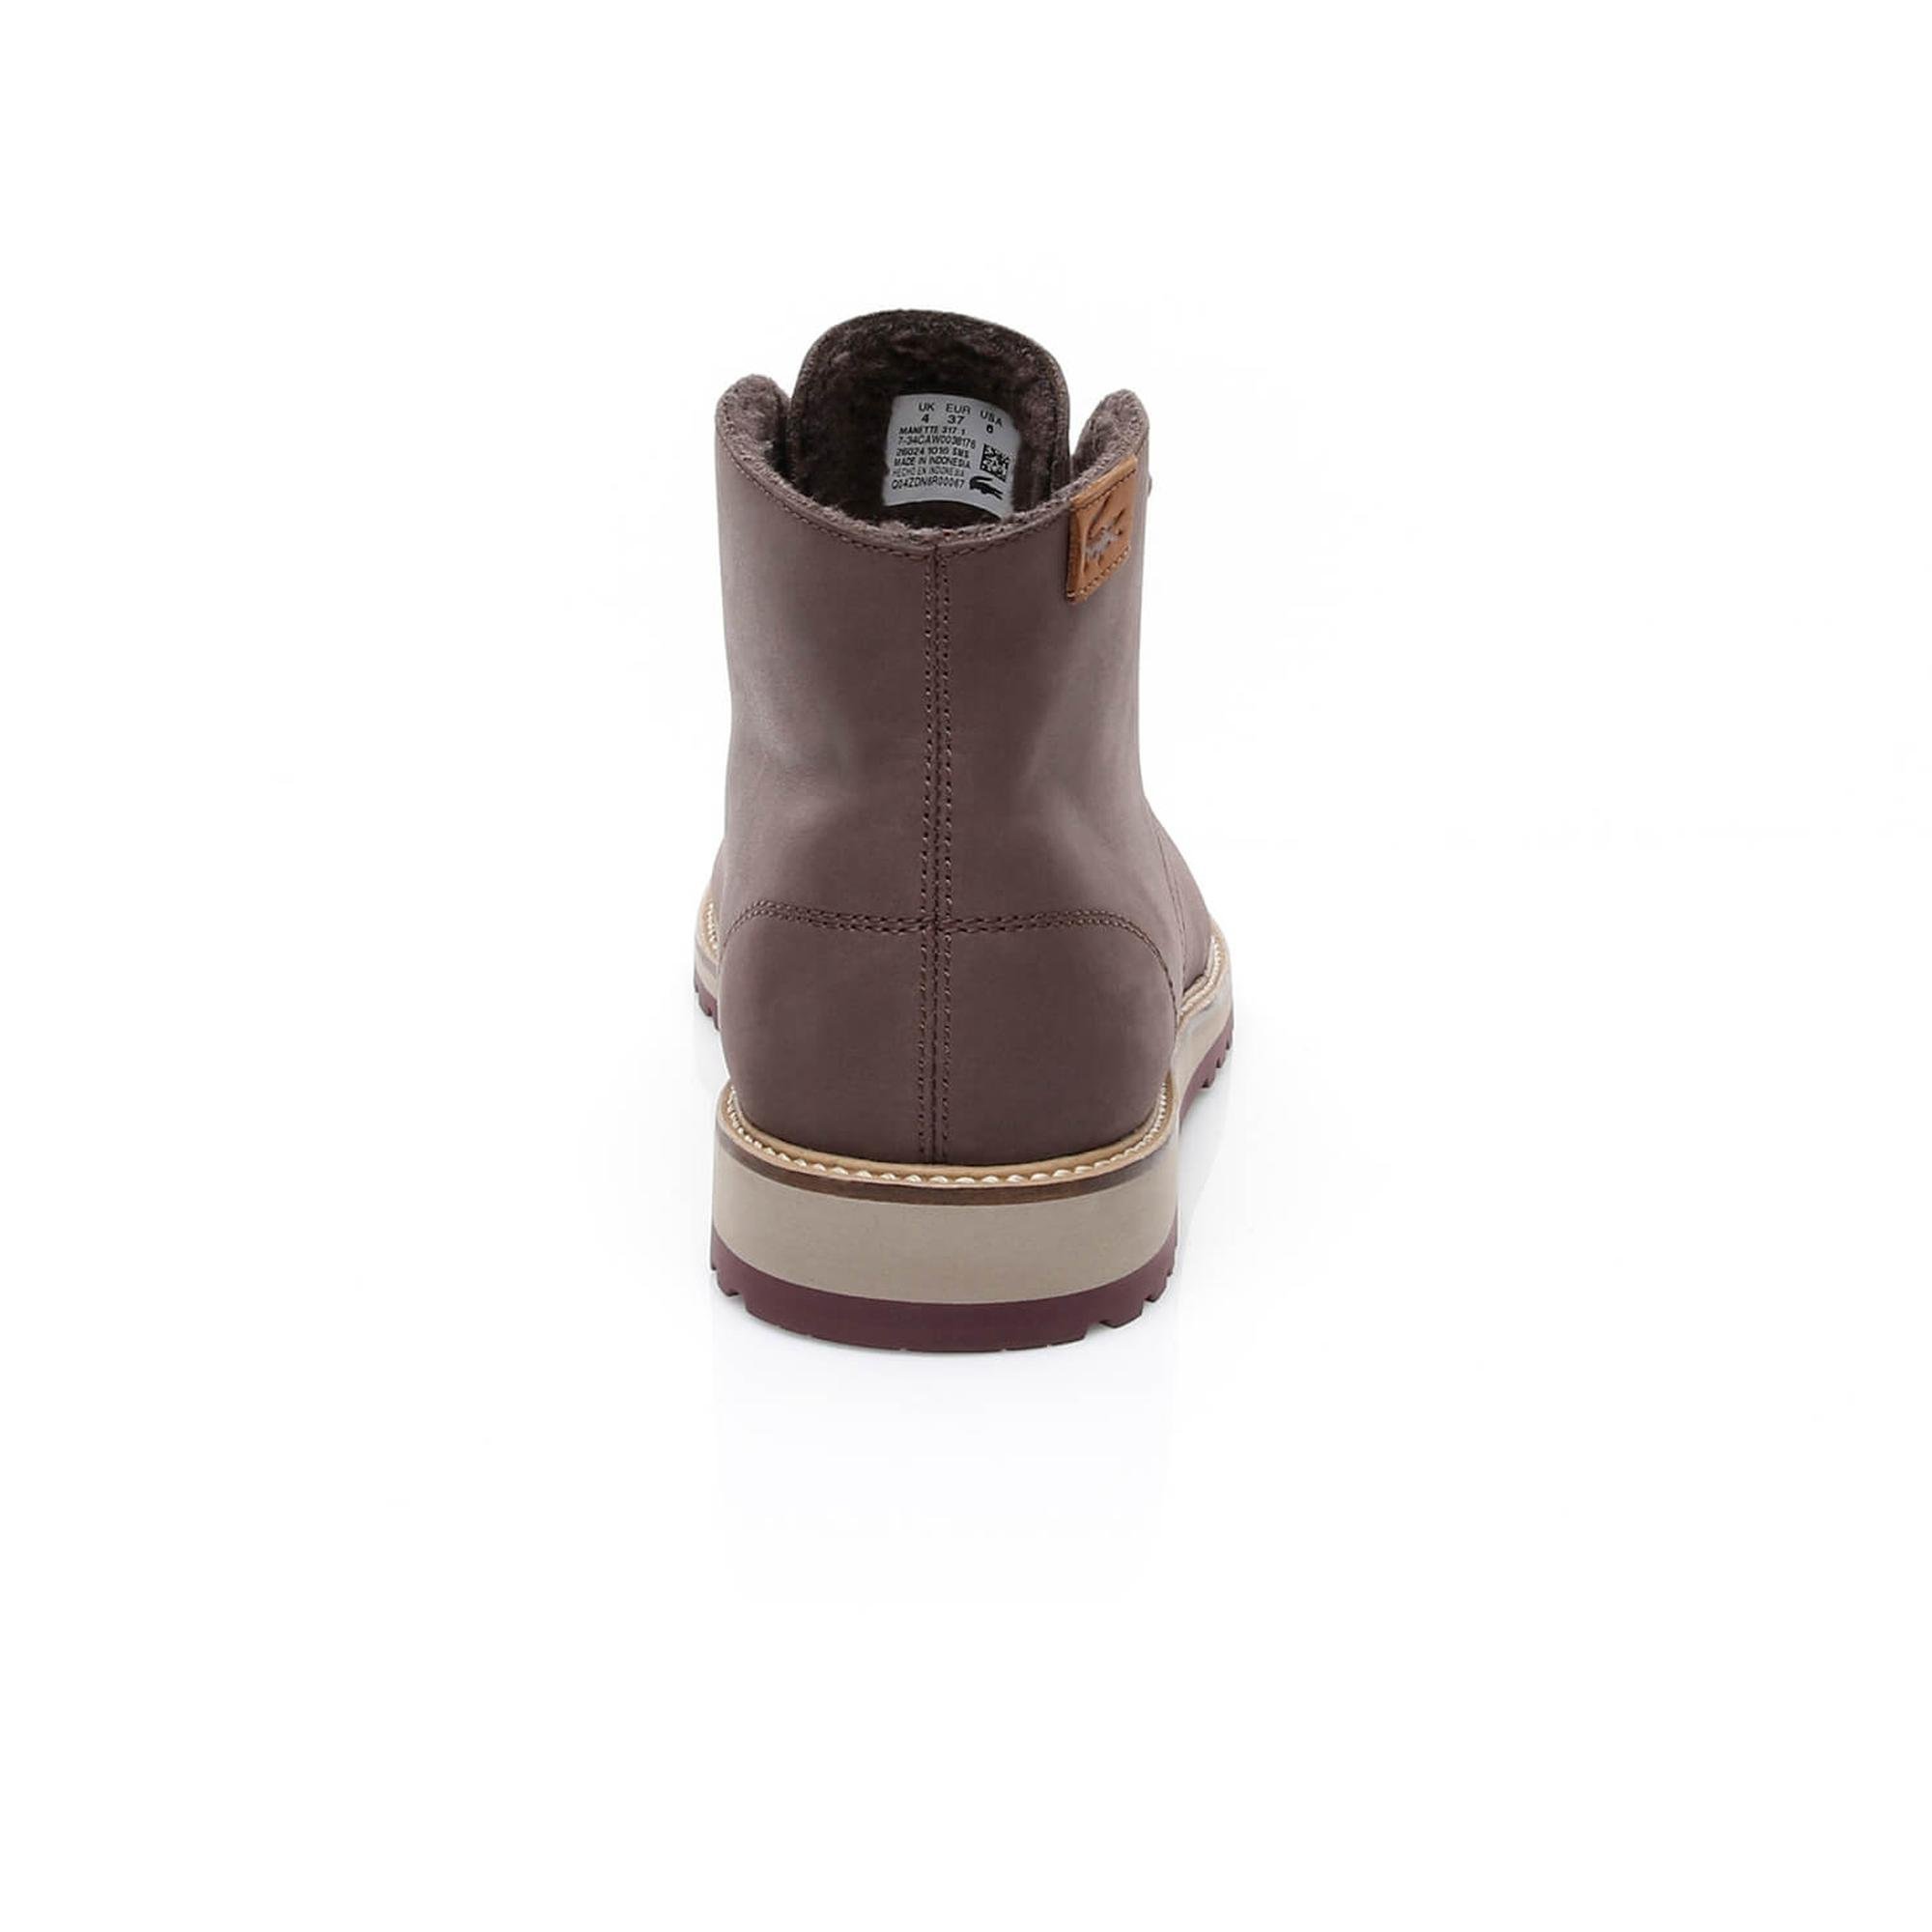 Lacoste Manette 317 1 Damskie Boots